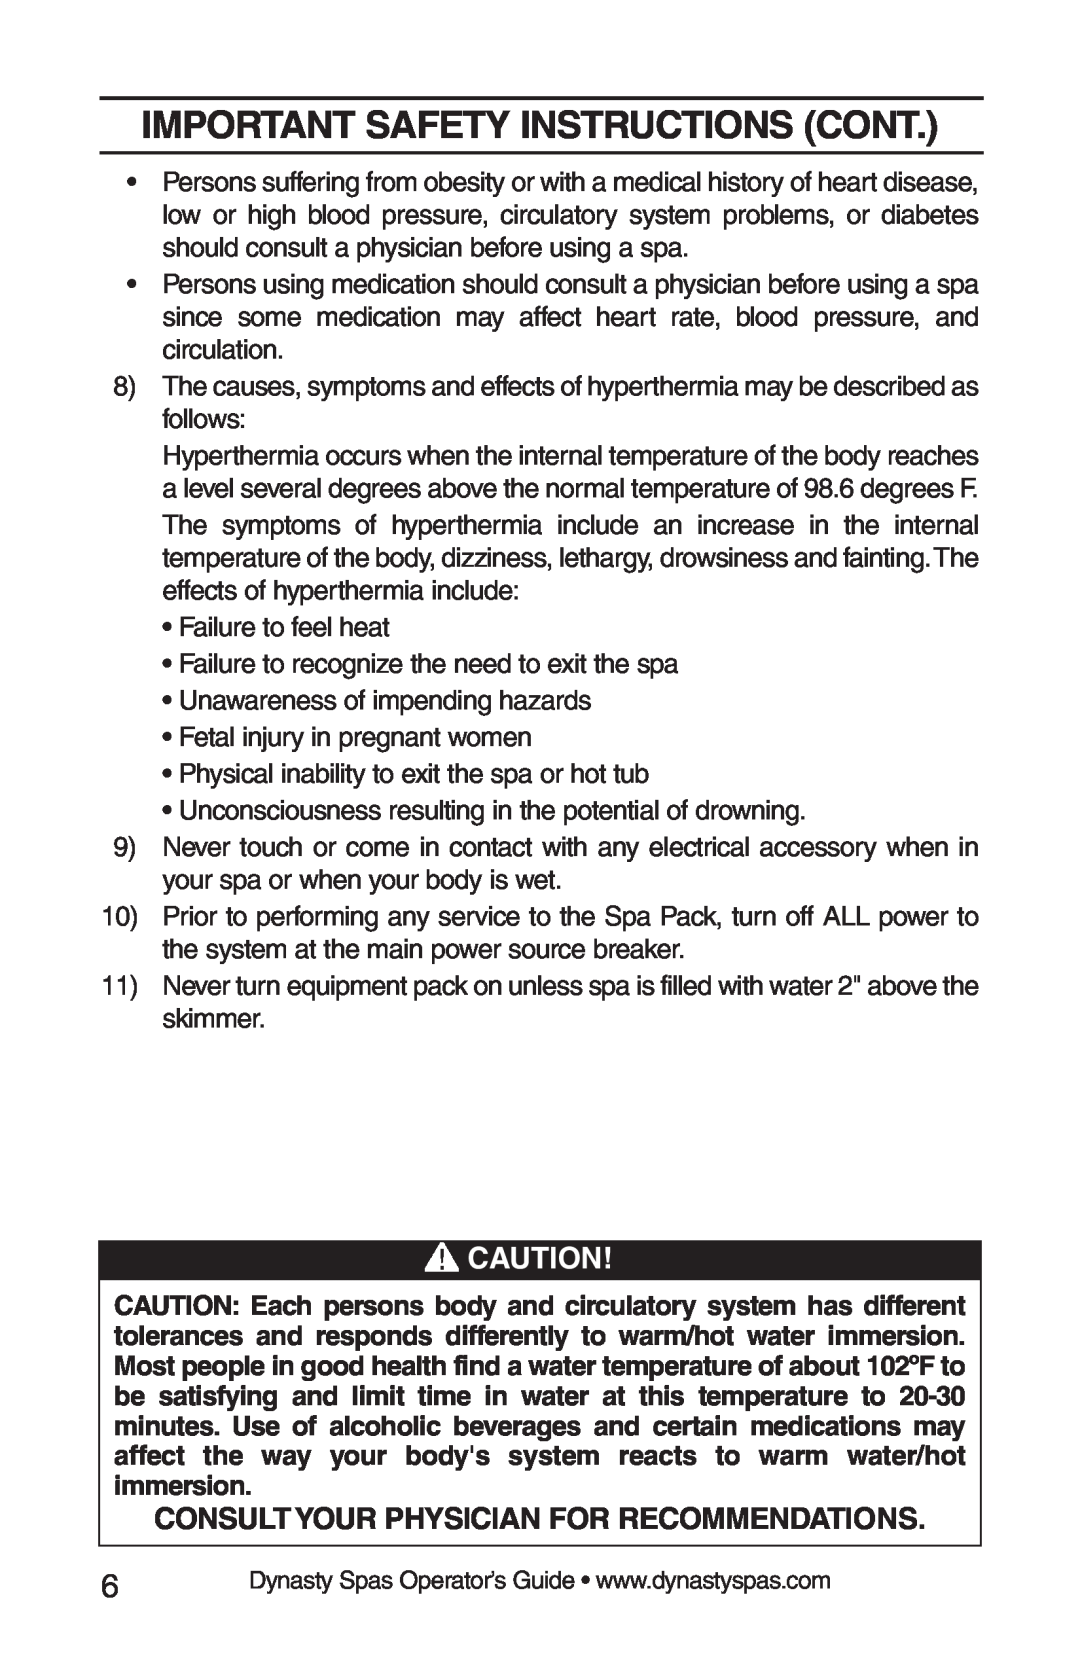 Dynasty Spas 2008 manual Important Safety Instructions Cont, Consult Your Physician For Recommendations 